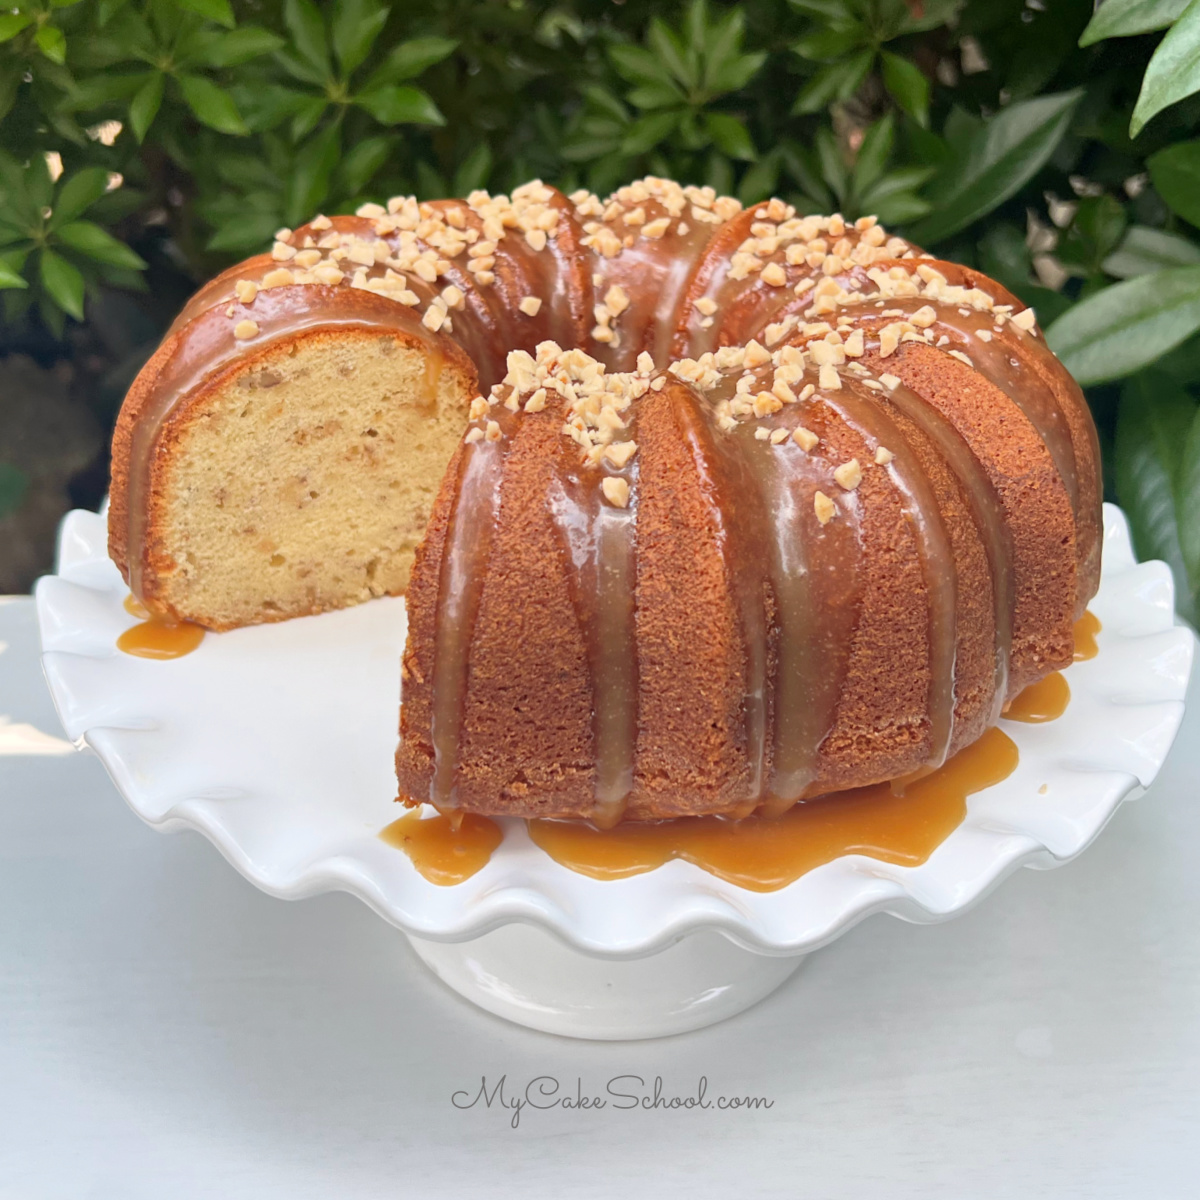 Sliced Toffee Pecan Bundt Cake with caramel glaze on a white pedestal. Top is sprinkled with toffee bits.